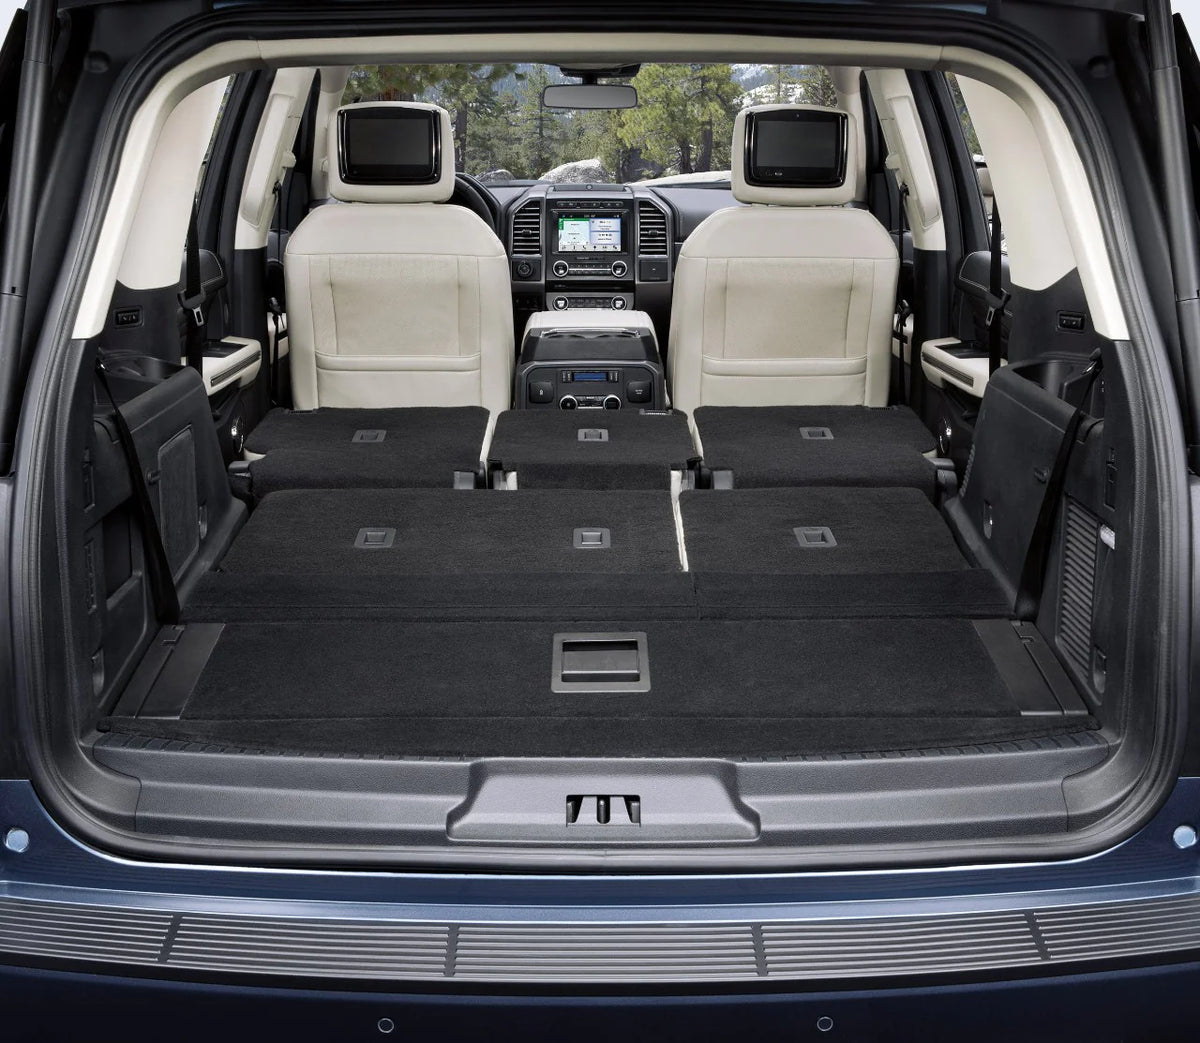 What is the Cargo Space for 2019 Ford Expedition?